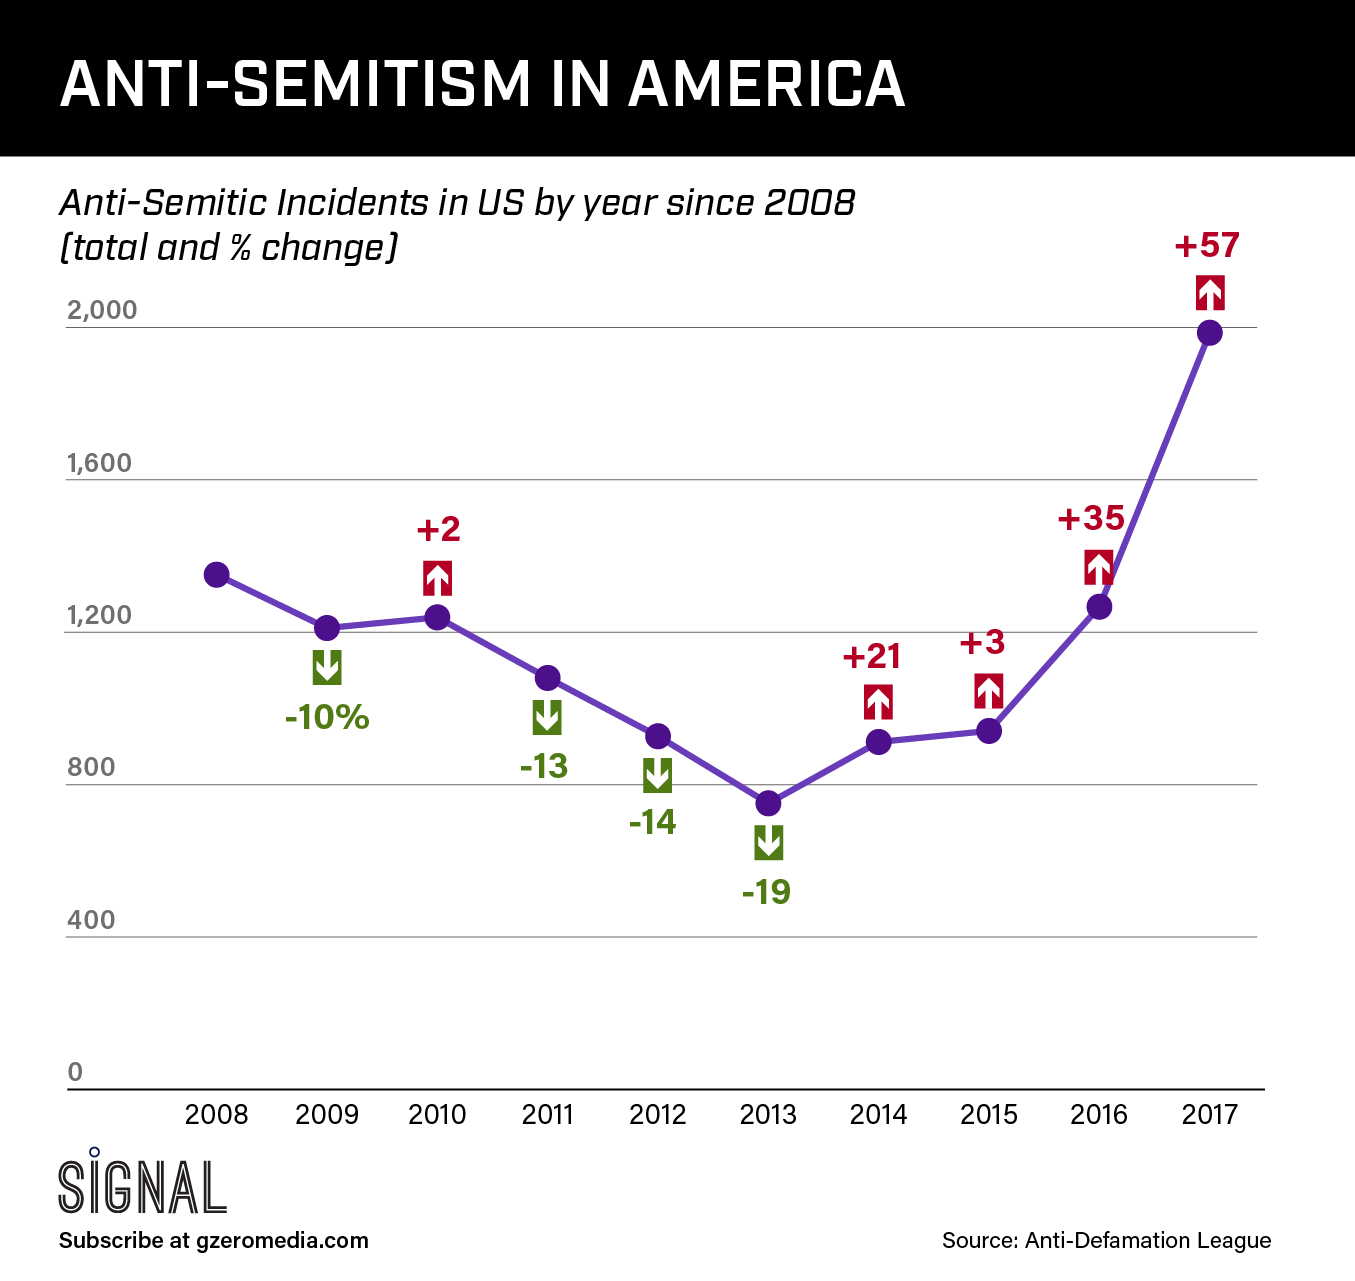 THE GRAPHIC TRUTH: ANTI-SEMITISM IN THE UNITED STATES